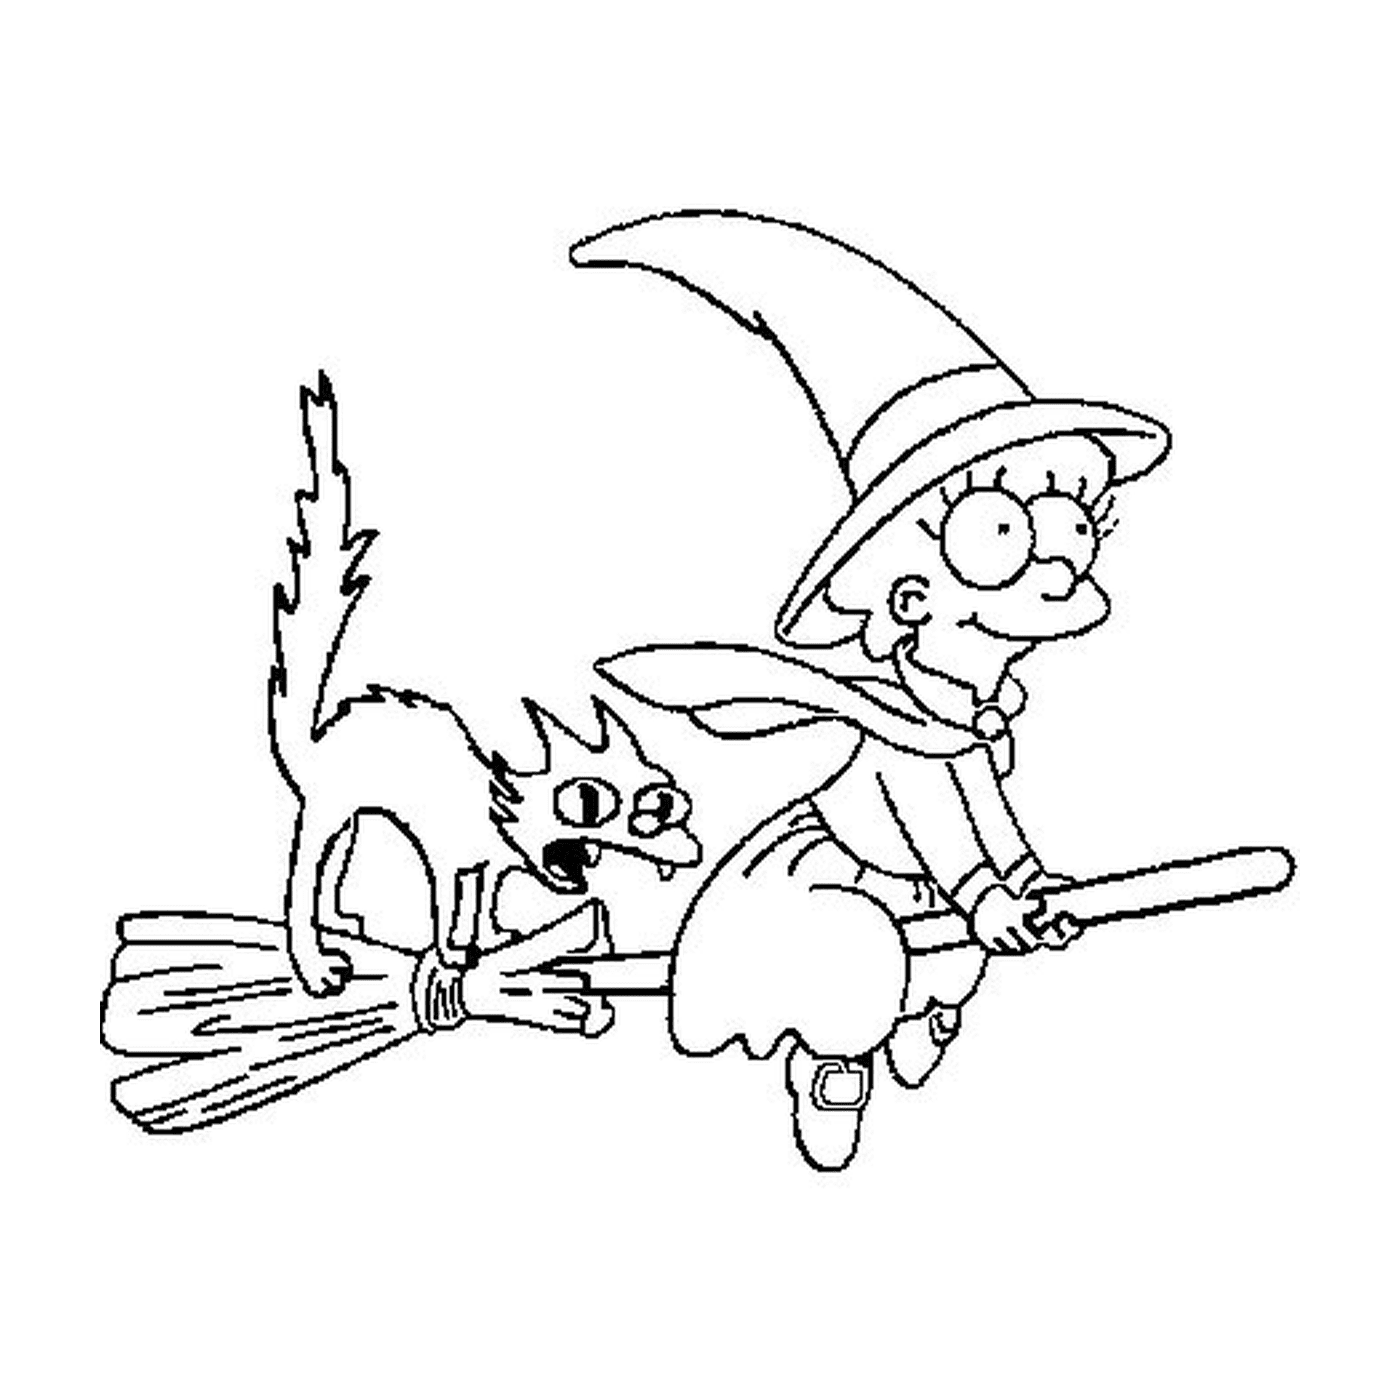  Witch and flying cat on broom 